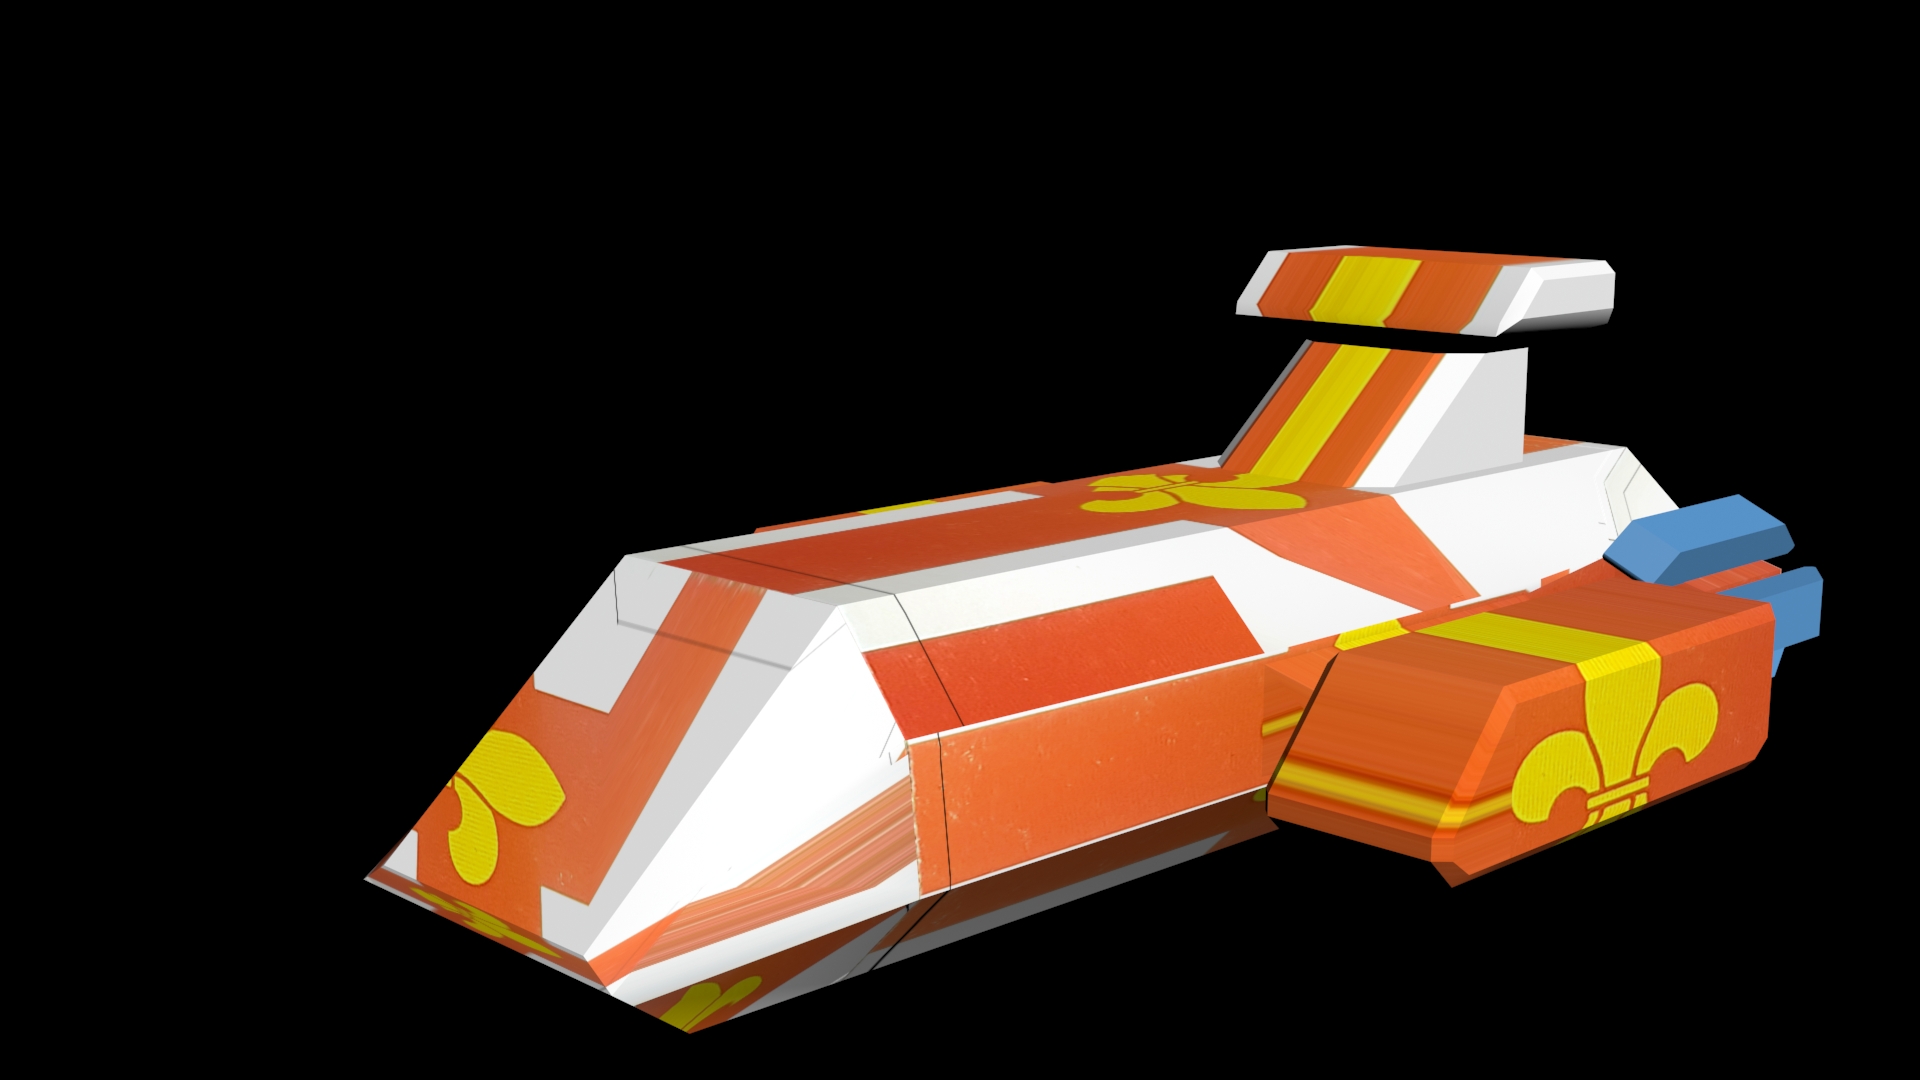 Simple 3D rendered spaceship with a red and white texture.